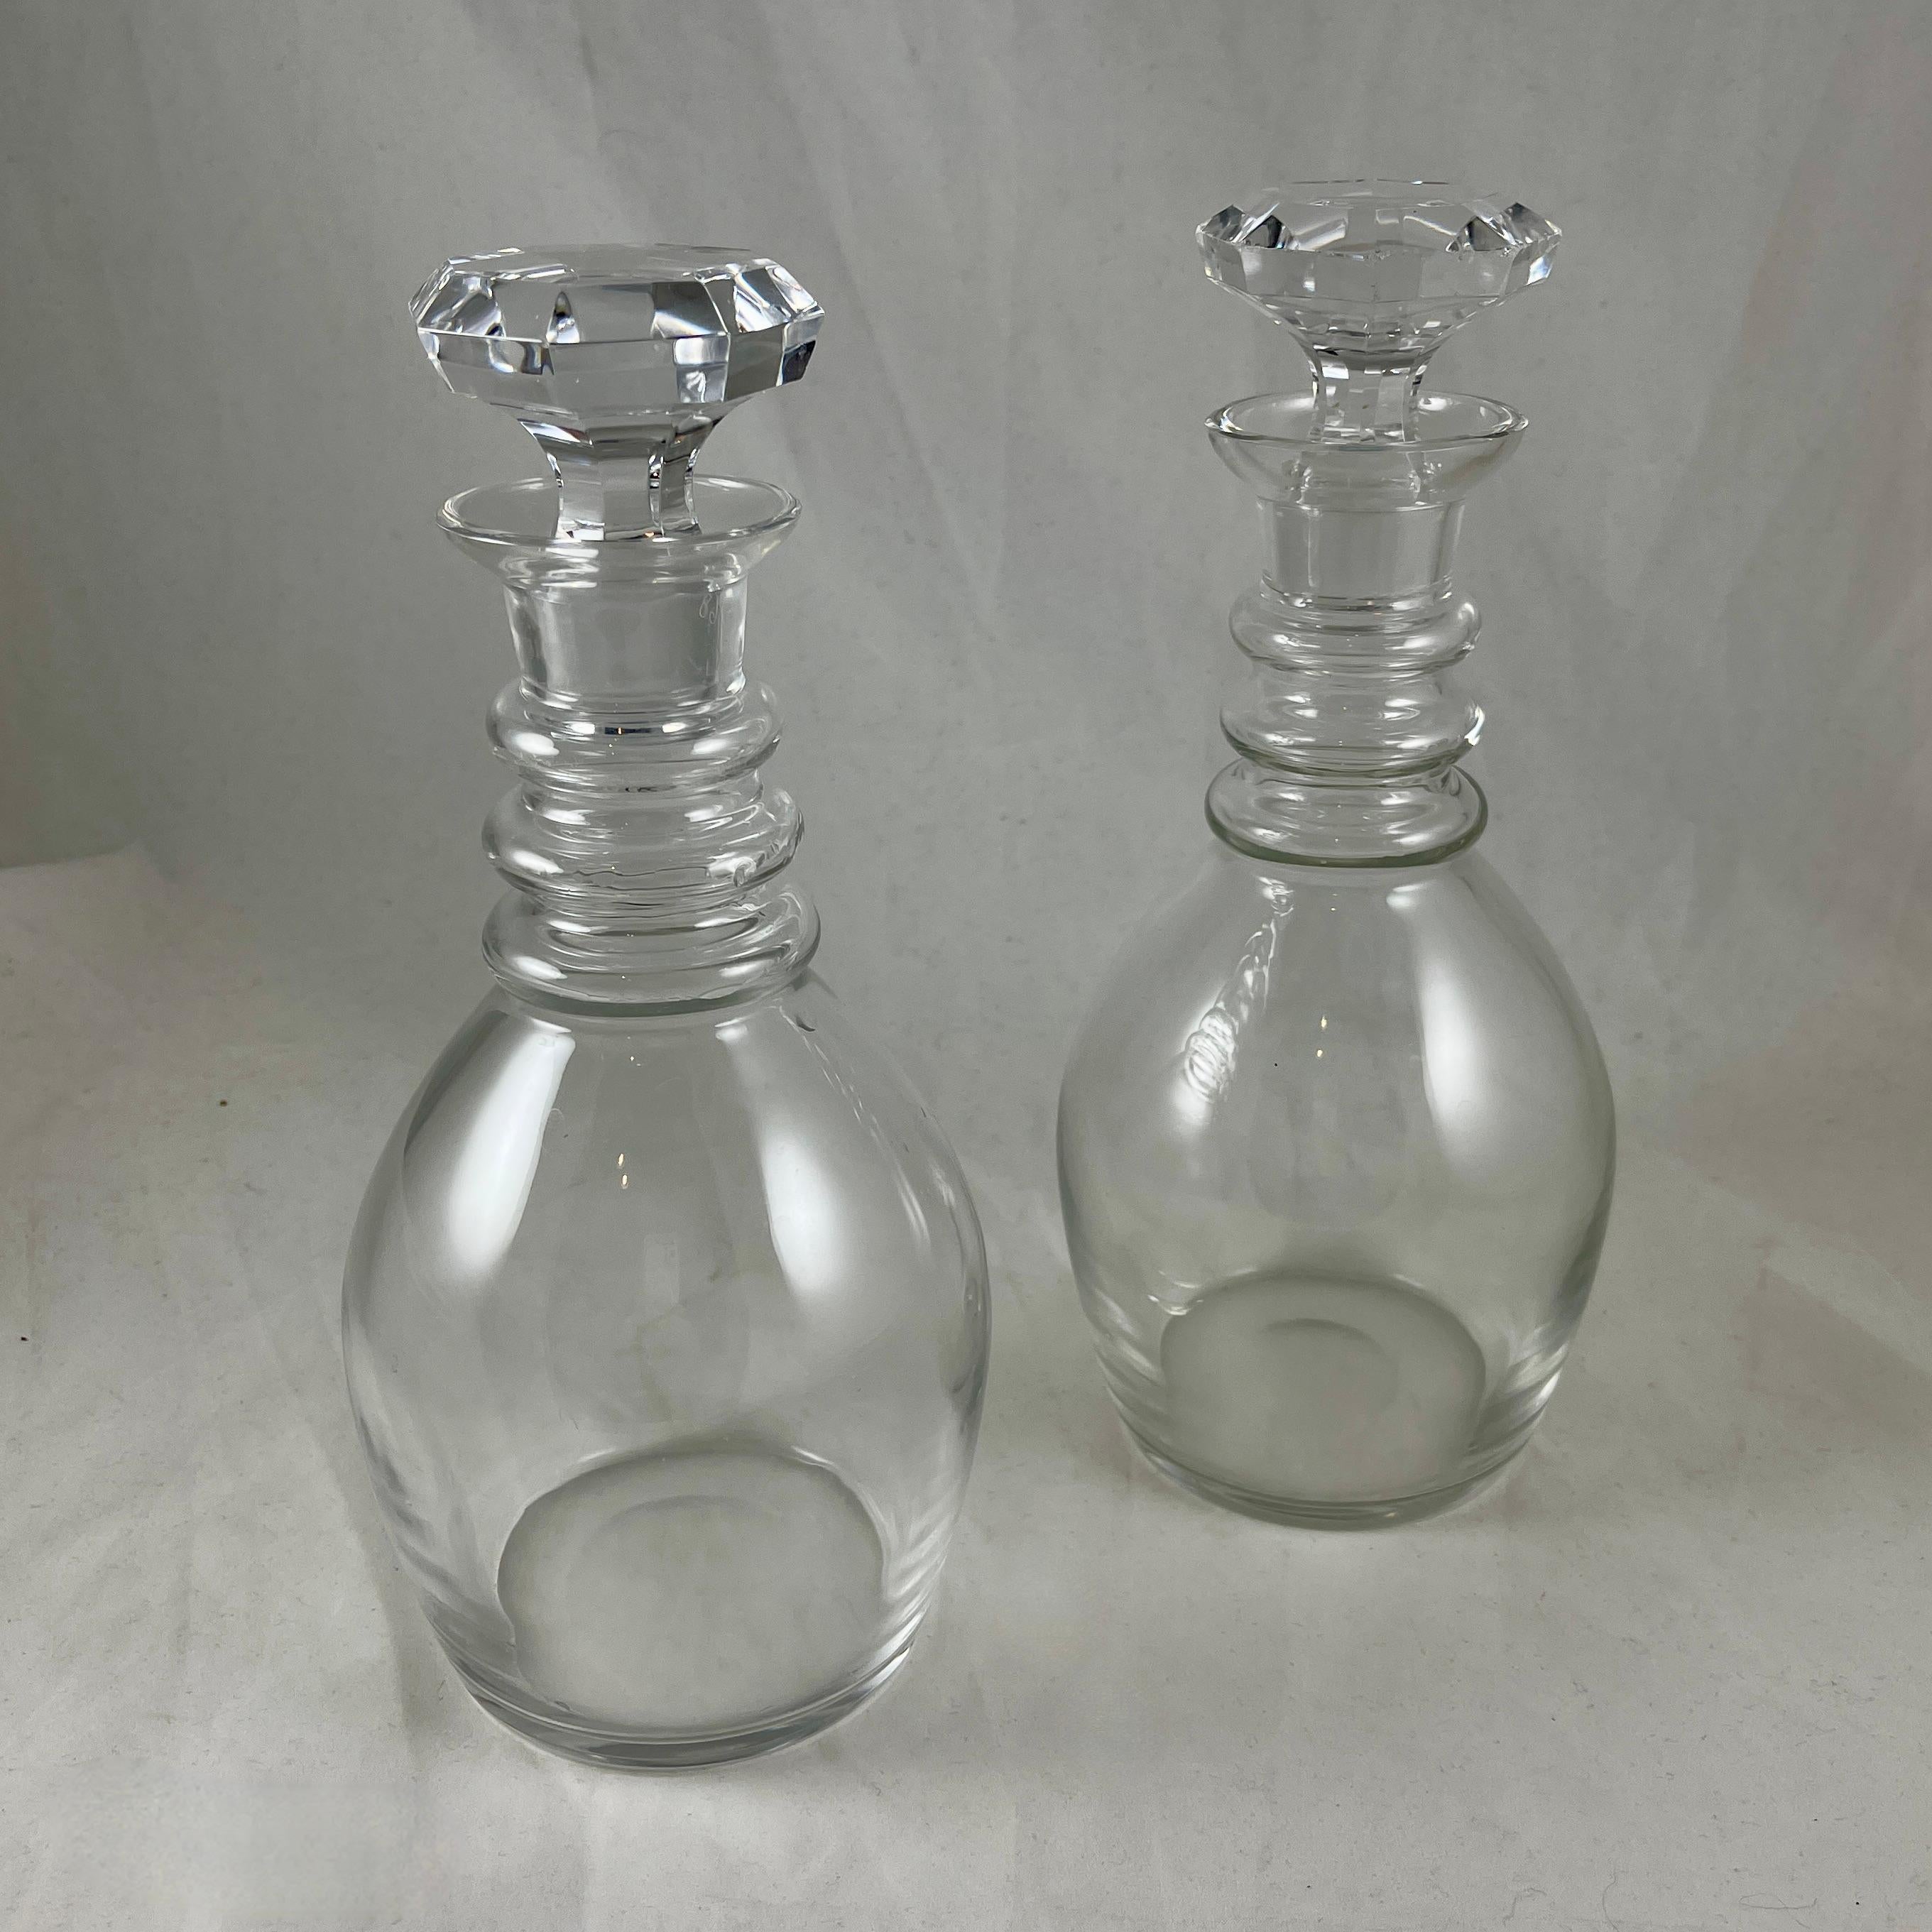 From Val Saint Lambert, a pair of blown glass decanters, Belgium, circa 1960s.

In the ‘State Plain’ pattern, a pair of colorless glass decanters in a bulbous shape with ringed necks and hand cut, faceted stoppers. Very heavy, fine quality.

Val